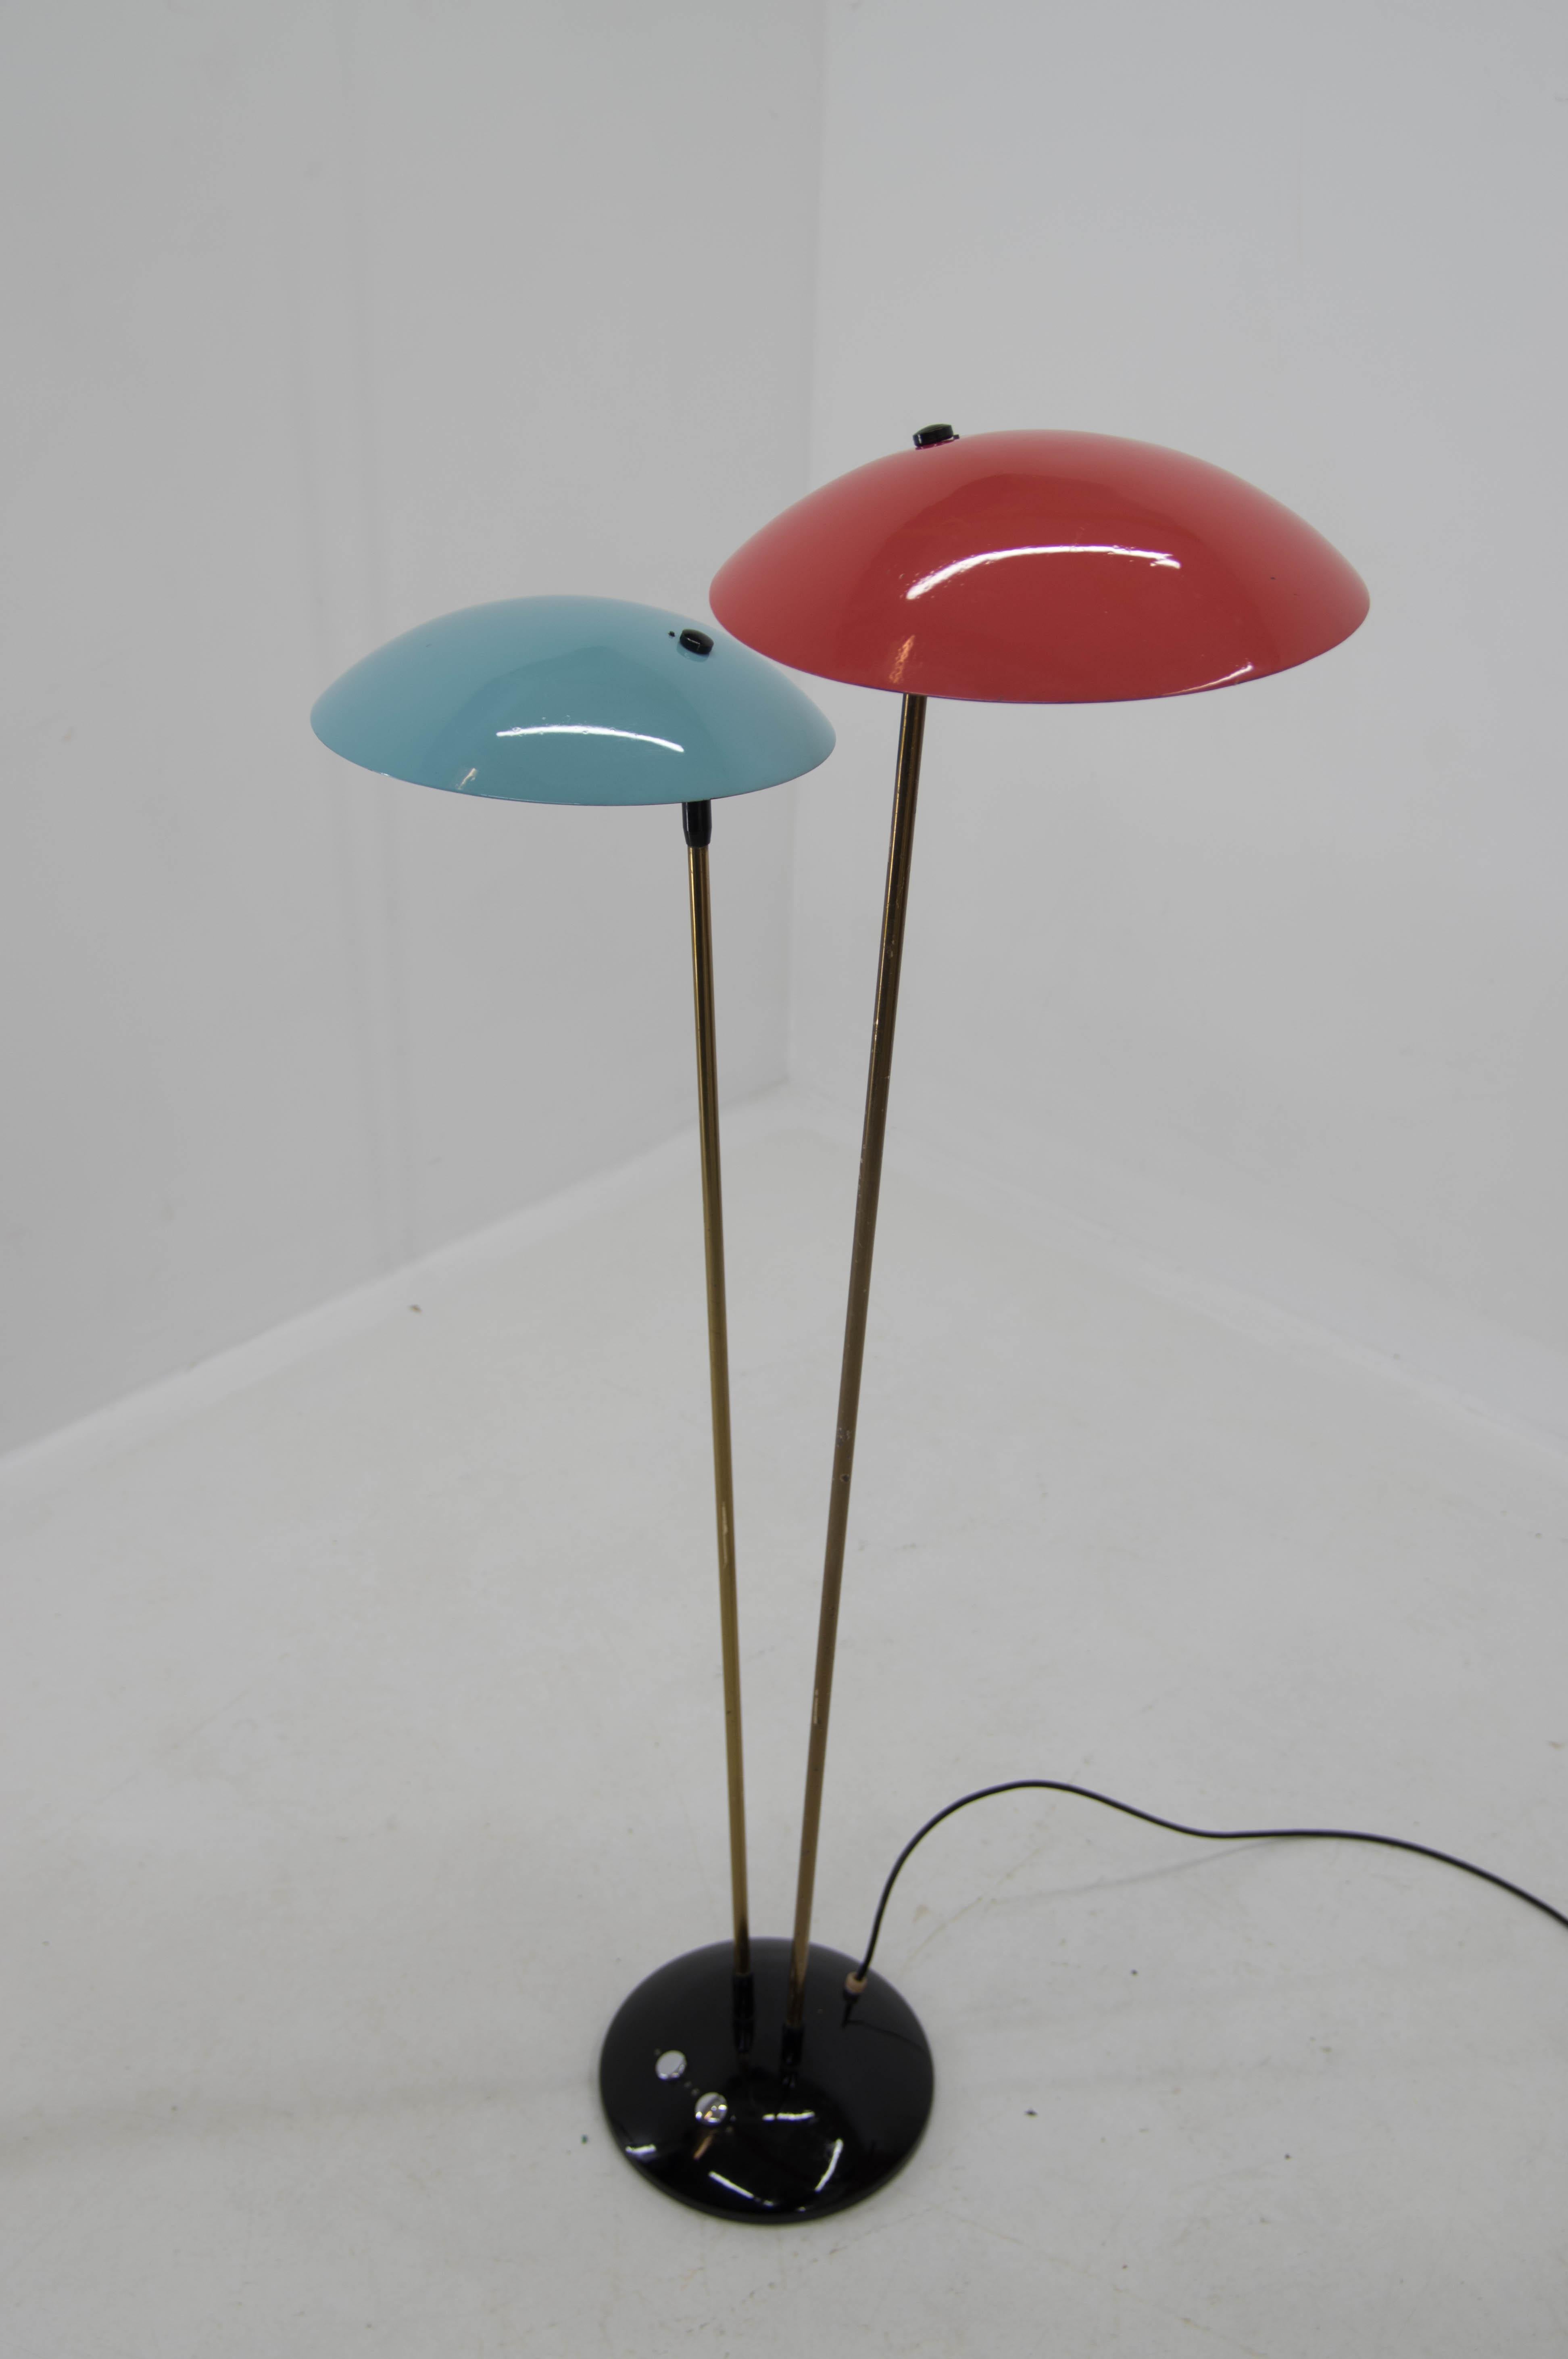 Rare iconic floor lamp by Drukov. Very good original condition with only minor scratches. Cleaned, polished, rewired. 2x60W, E27 or E27 or E26 bulbs. Two separate switches. US plug adapter included.